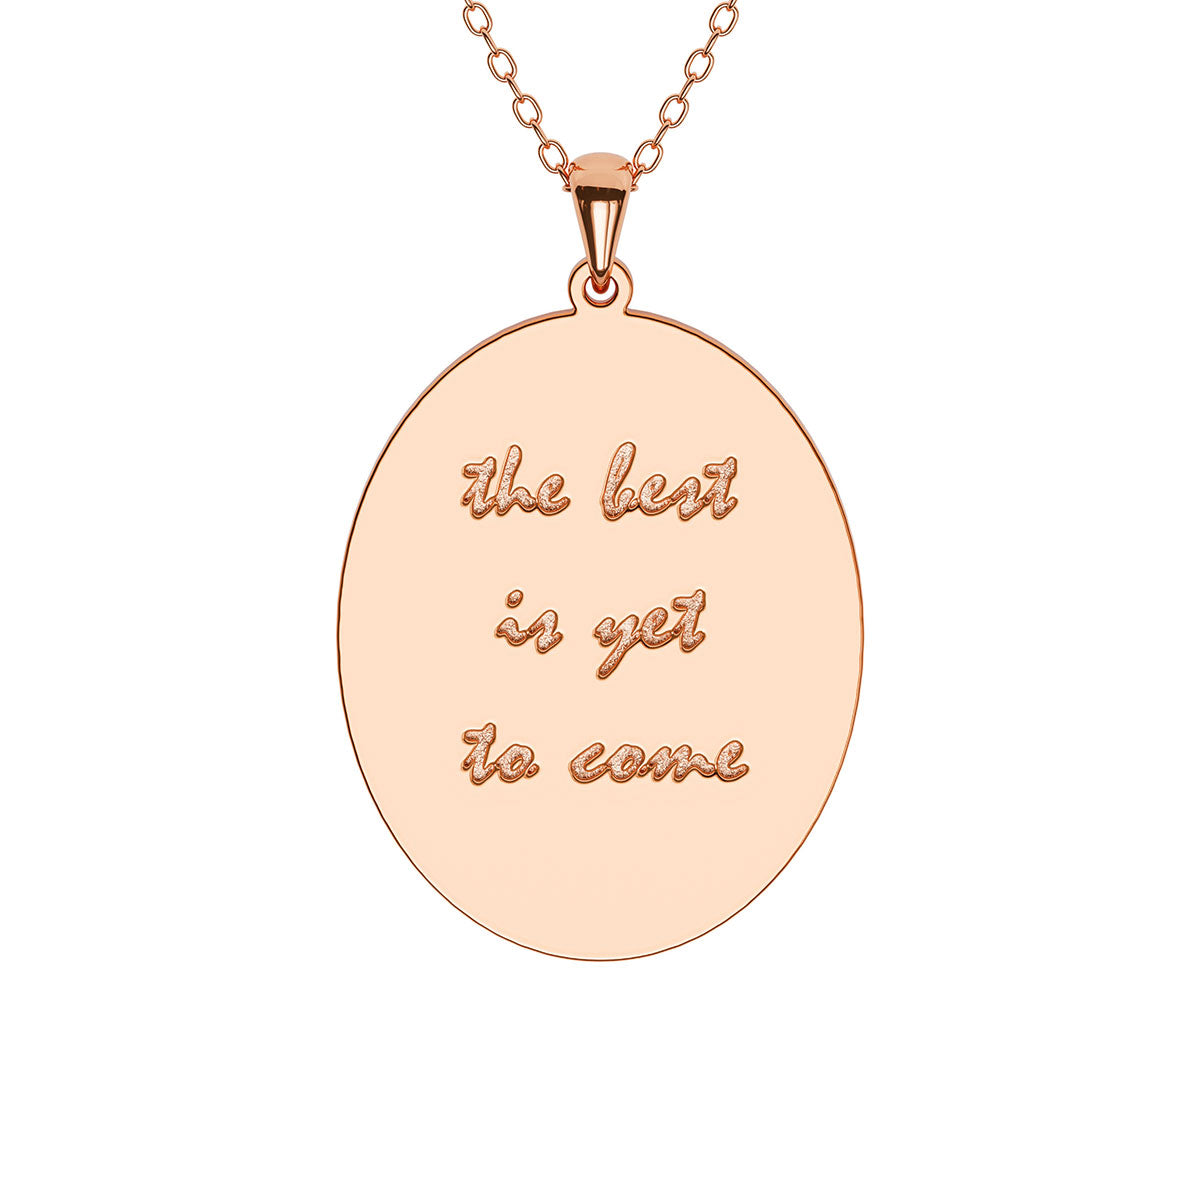 Personalized Oval Necklace with Engraving